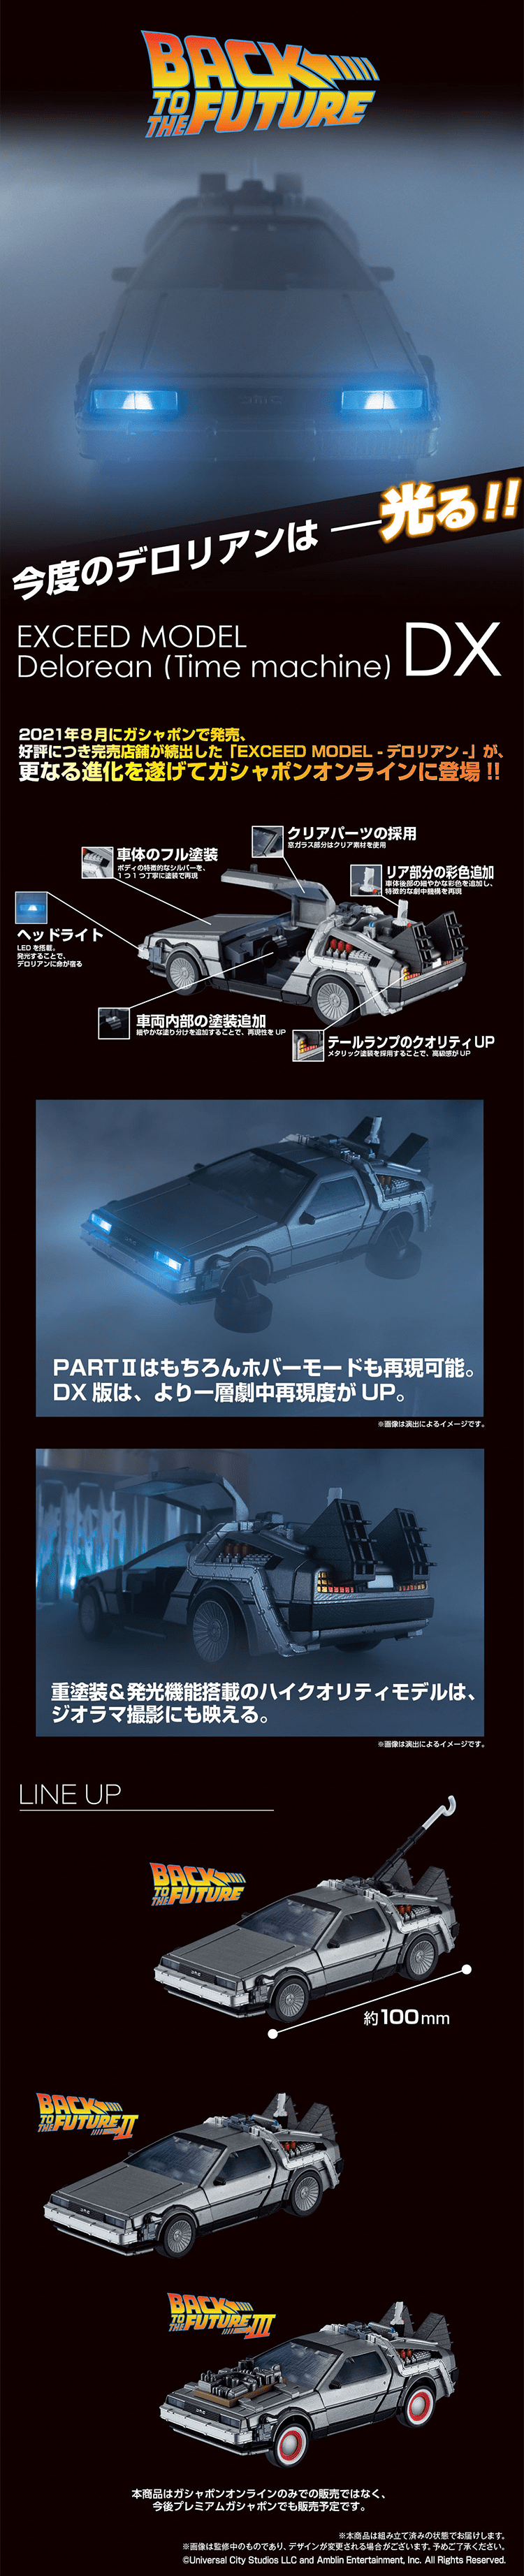 BACK TO THE FUTURE EXCEED MODEL -デロリアン- DX_pc_1